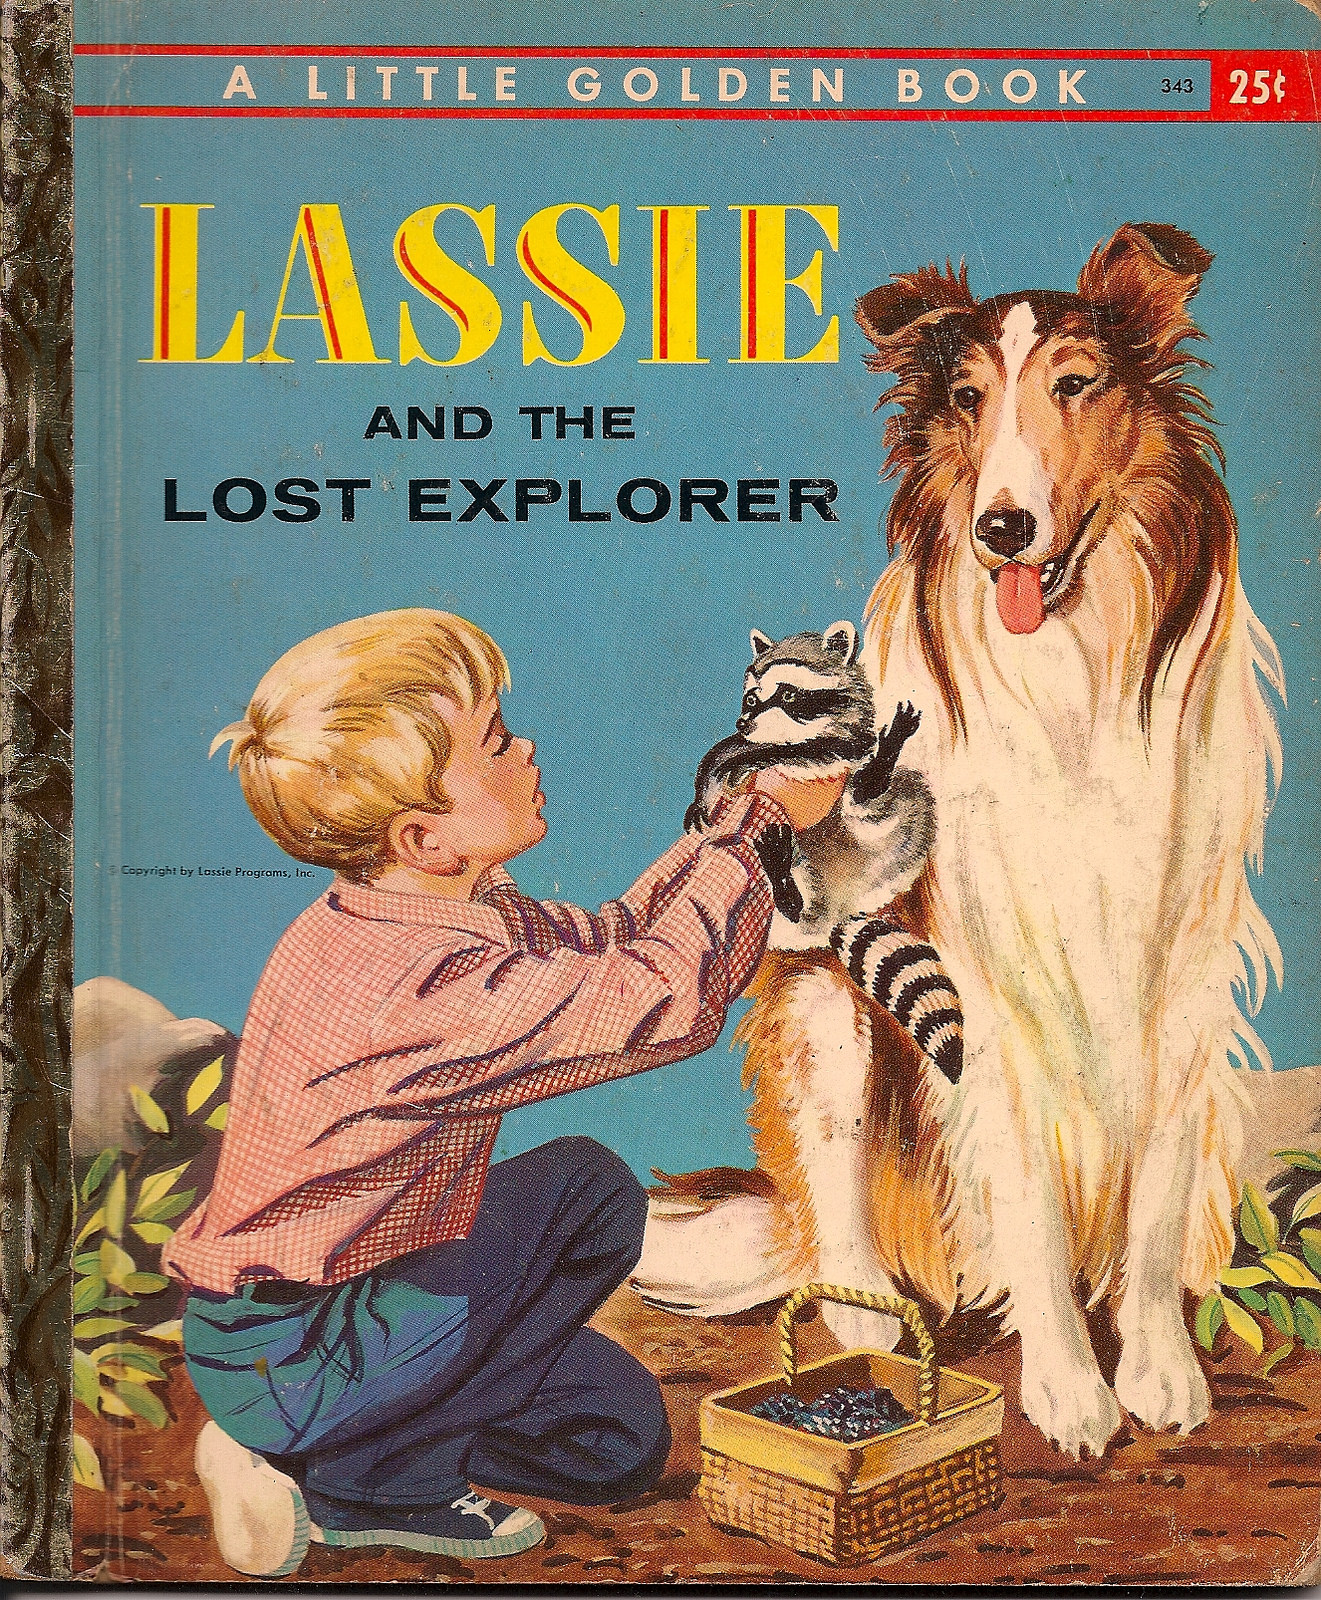 Lassie shows the way